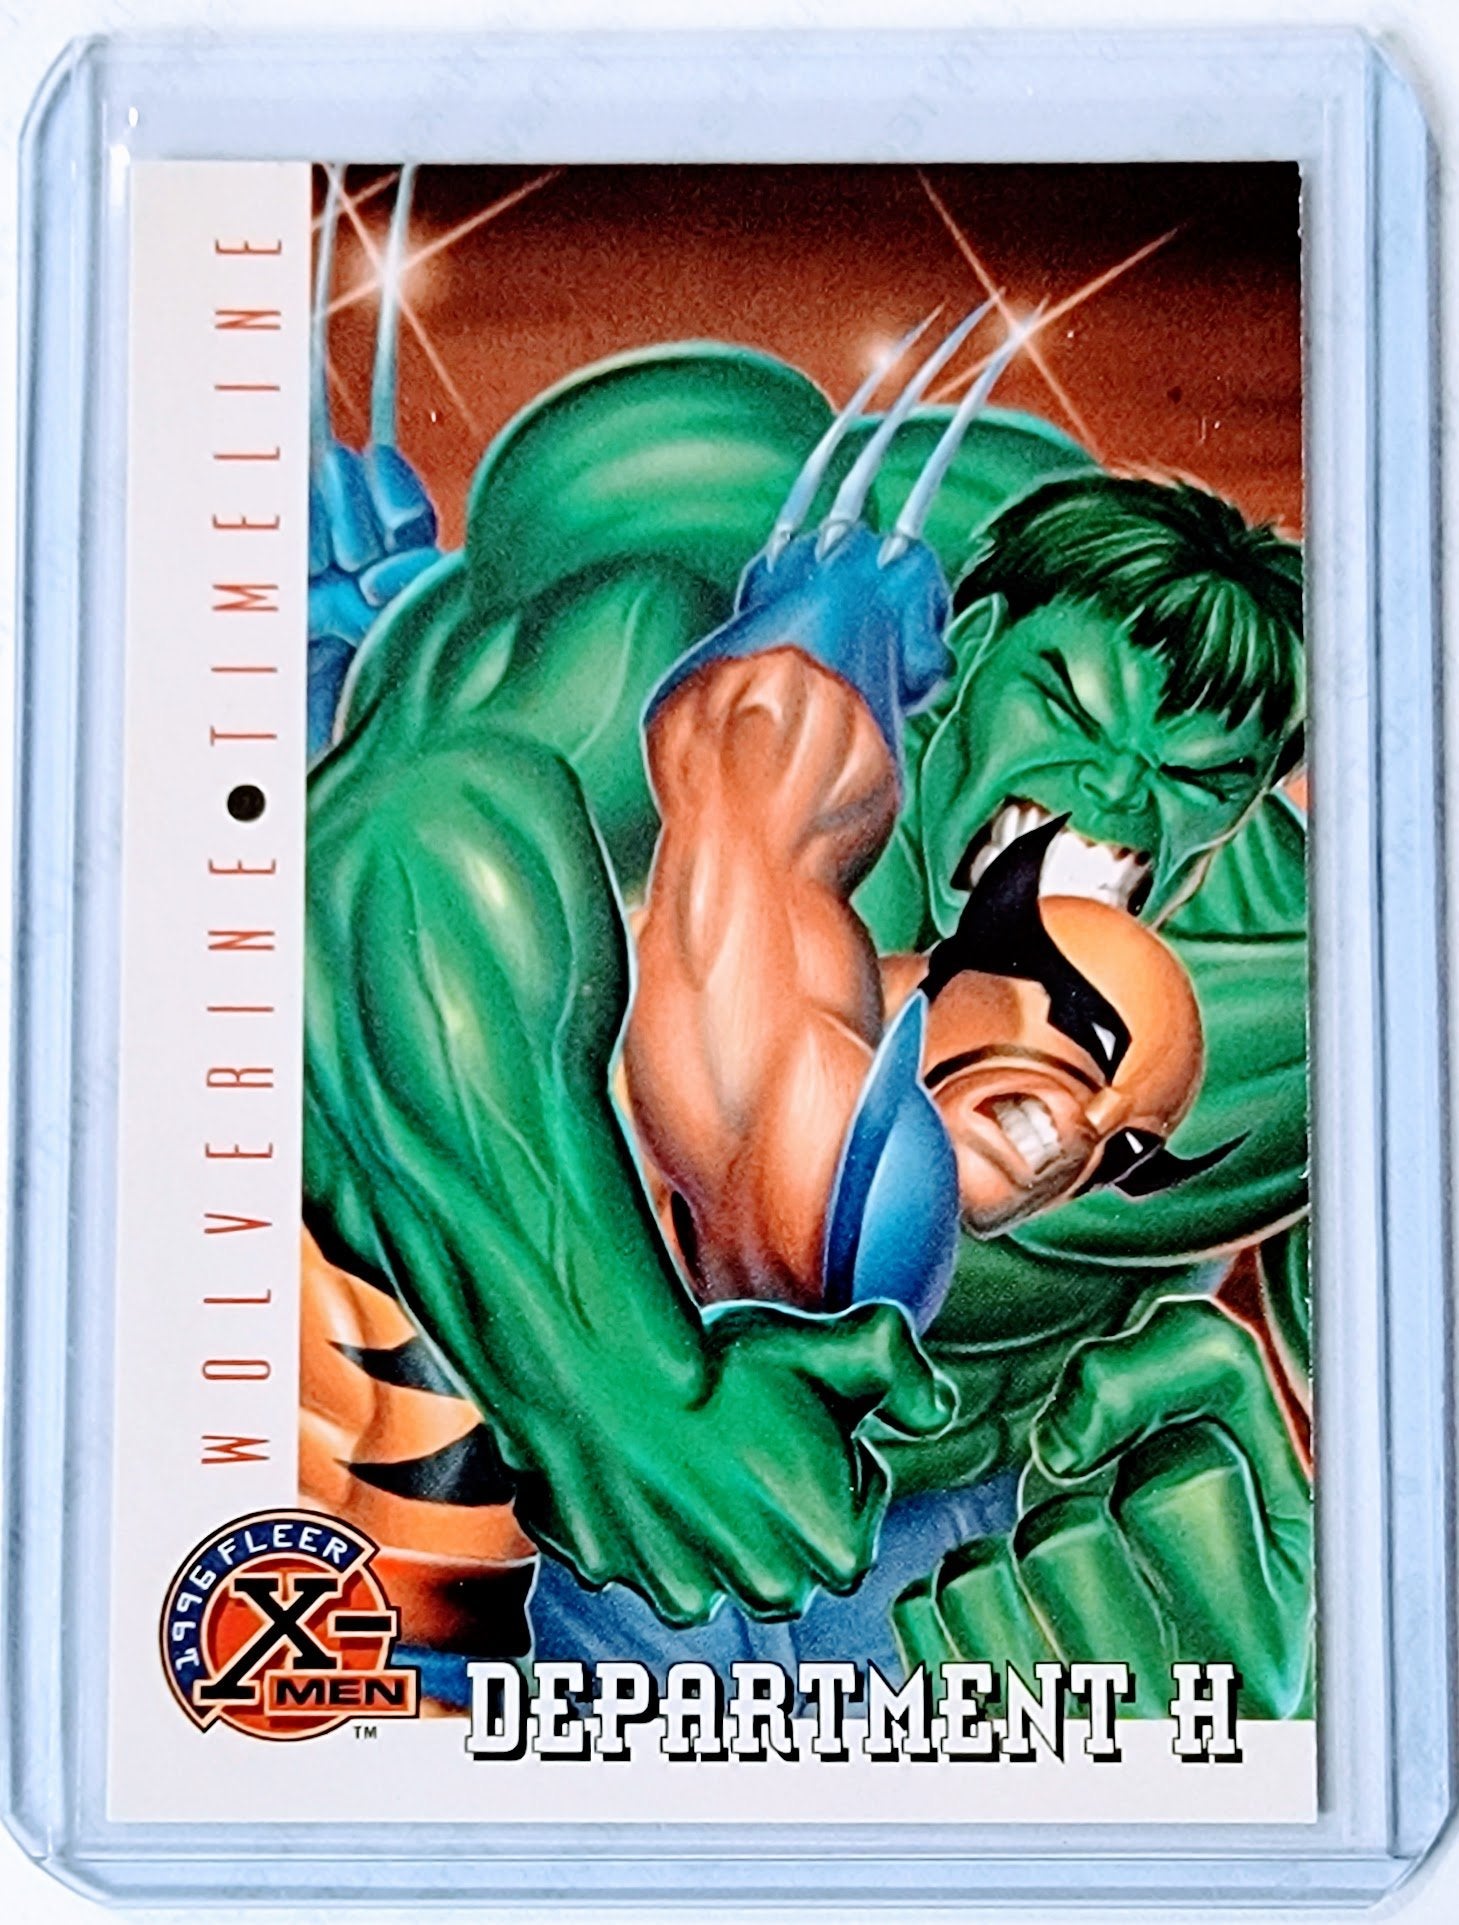 1996 Fleer X-Men Wolverine Timeline: Department H Marvel Trading Card GRB1 simple Xclusive Collectibles   